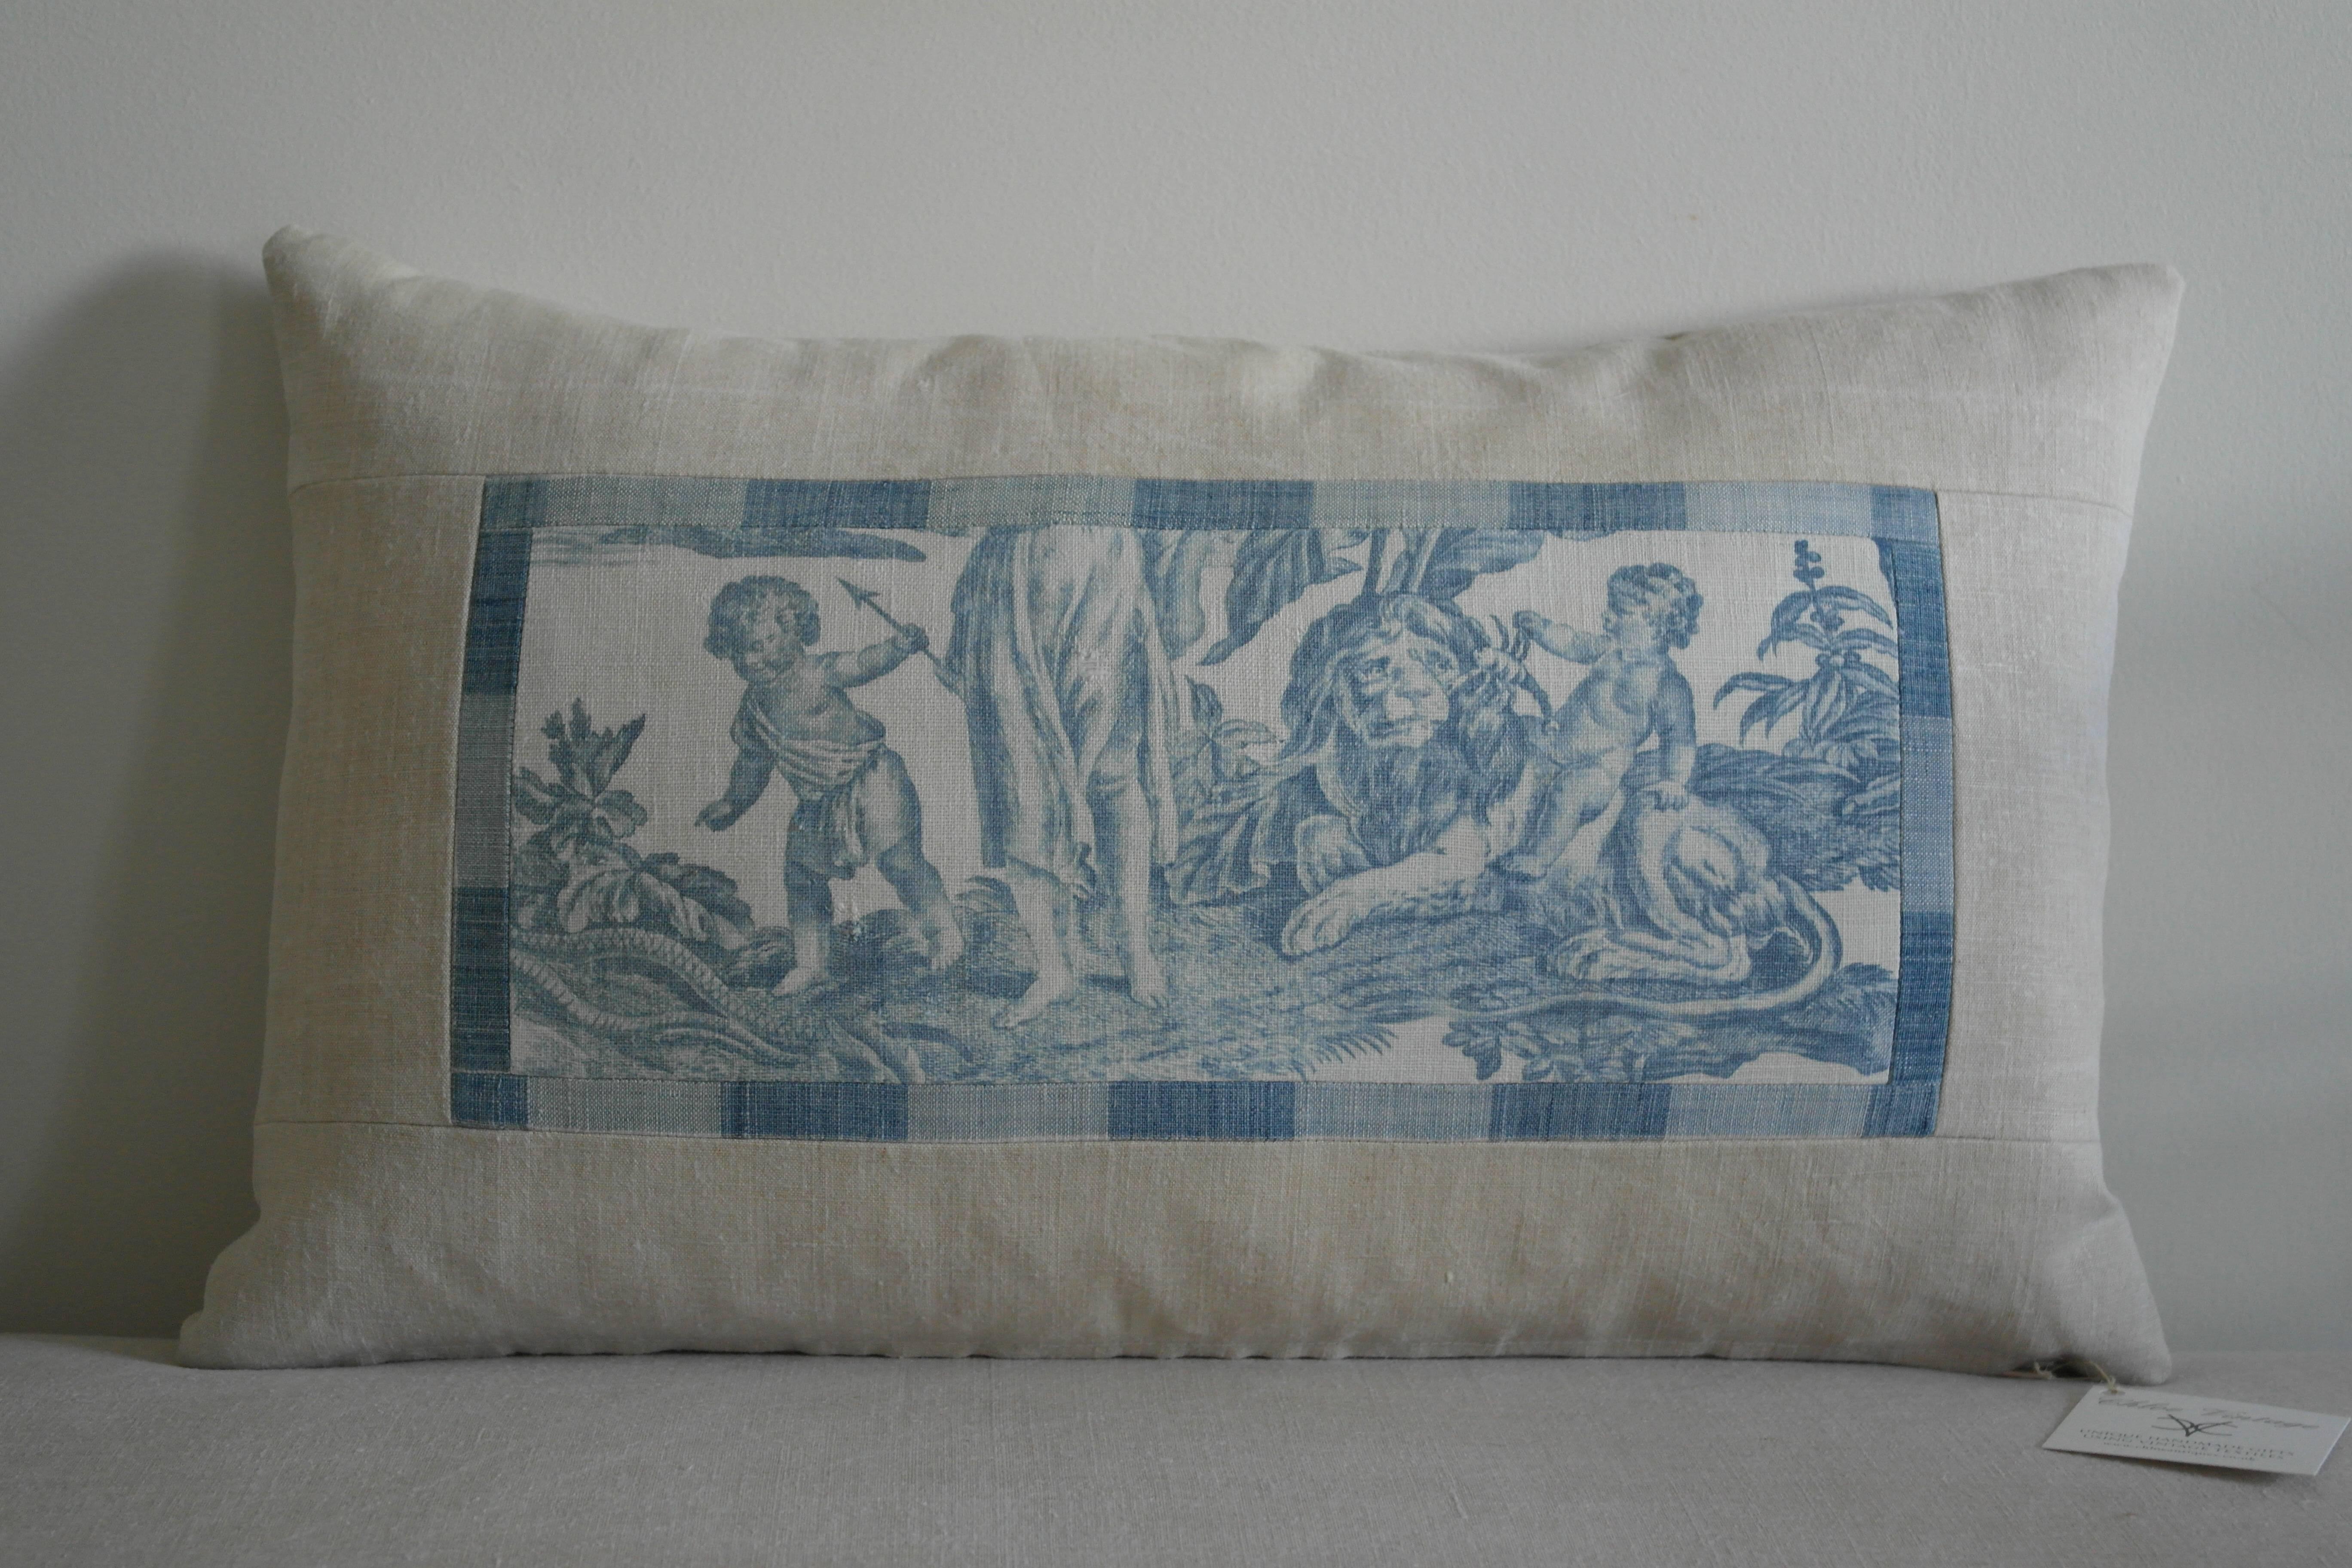 A pillow made from a panel of a rare late 18th century French linen toile called the ‘The Four Continents’ designed by Jean-Baptiste Huet. The central scene is charming - a naughty boy is dangling a lobster in front of a bemused if somewhat cross